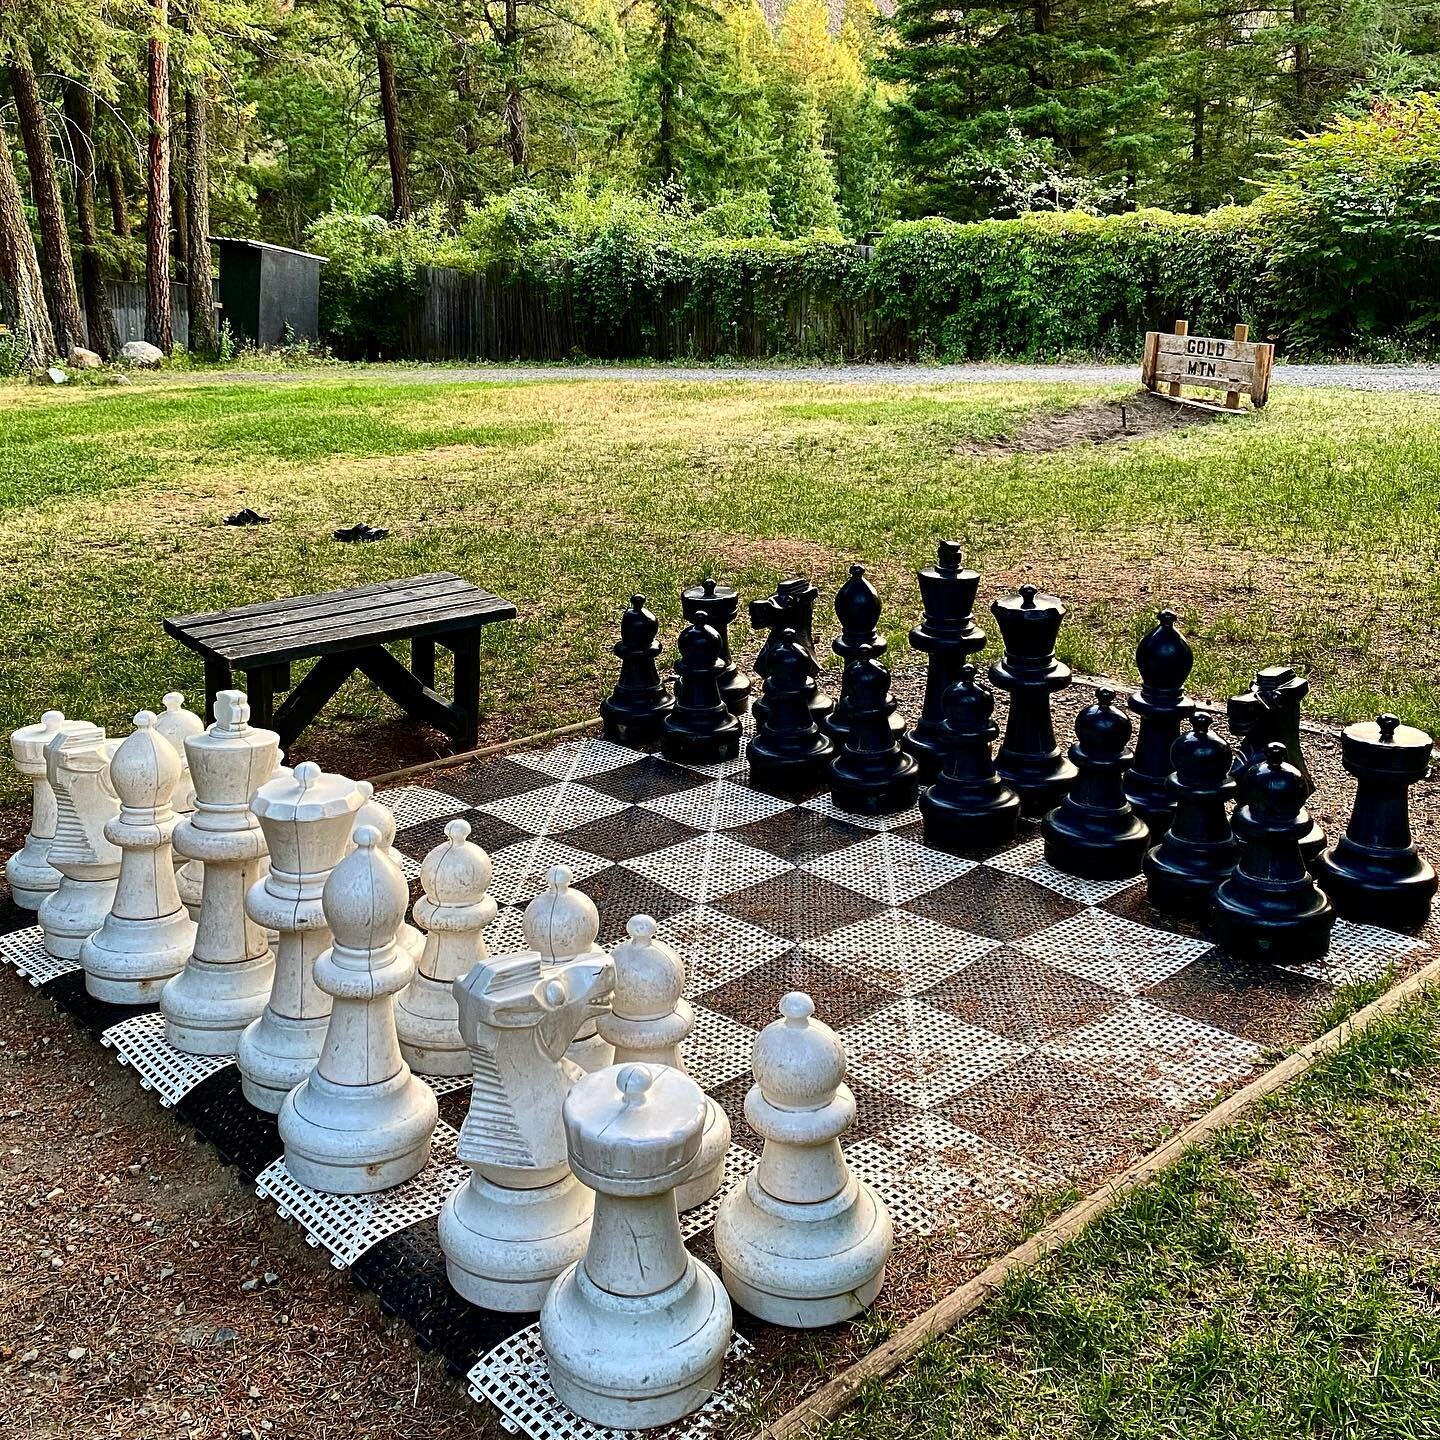 How to start a Monday morning. A cup of pour over Traveler coffee and a game of chess. So it goes.

#asthecrowflies #chessgame #mondaymorning #mondaymornings #campgames #vagabond #fowiththeflow #explorebc #smokefee